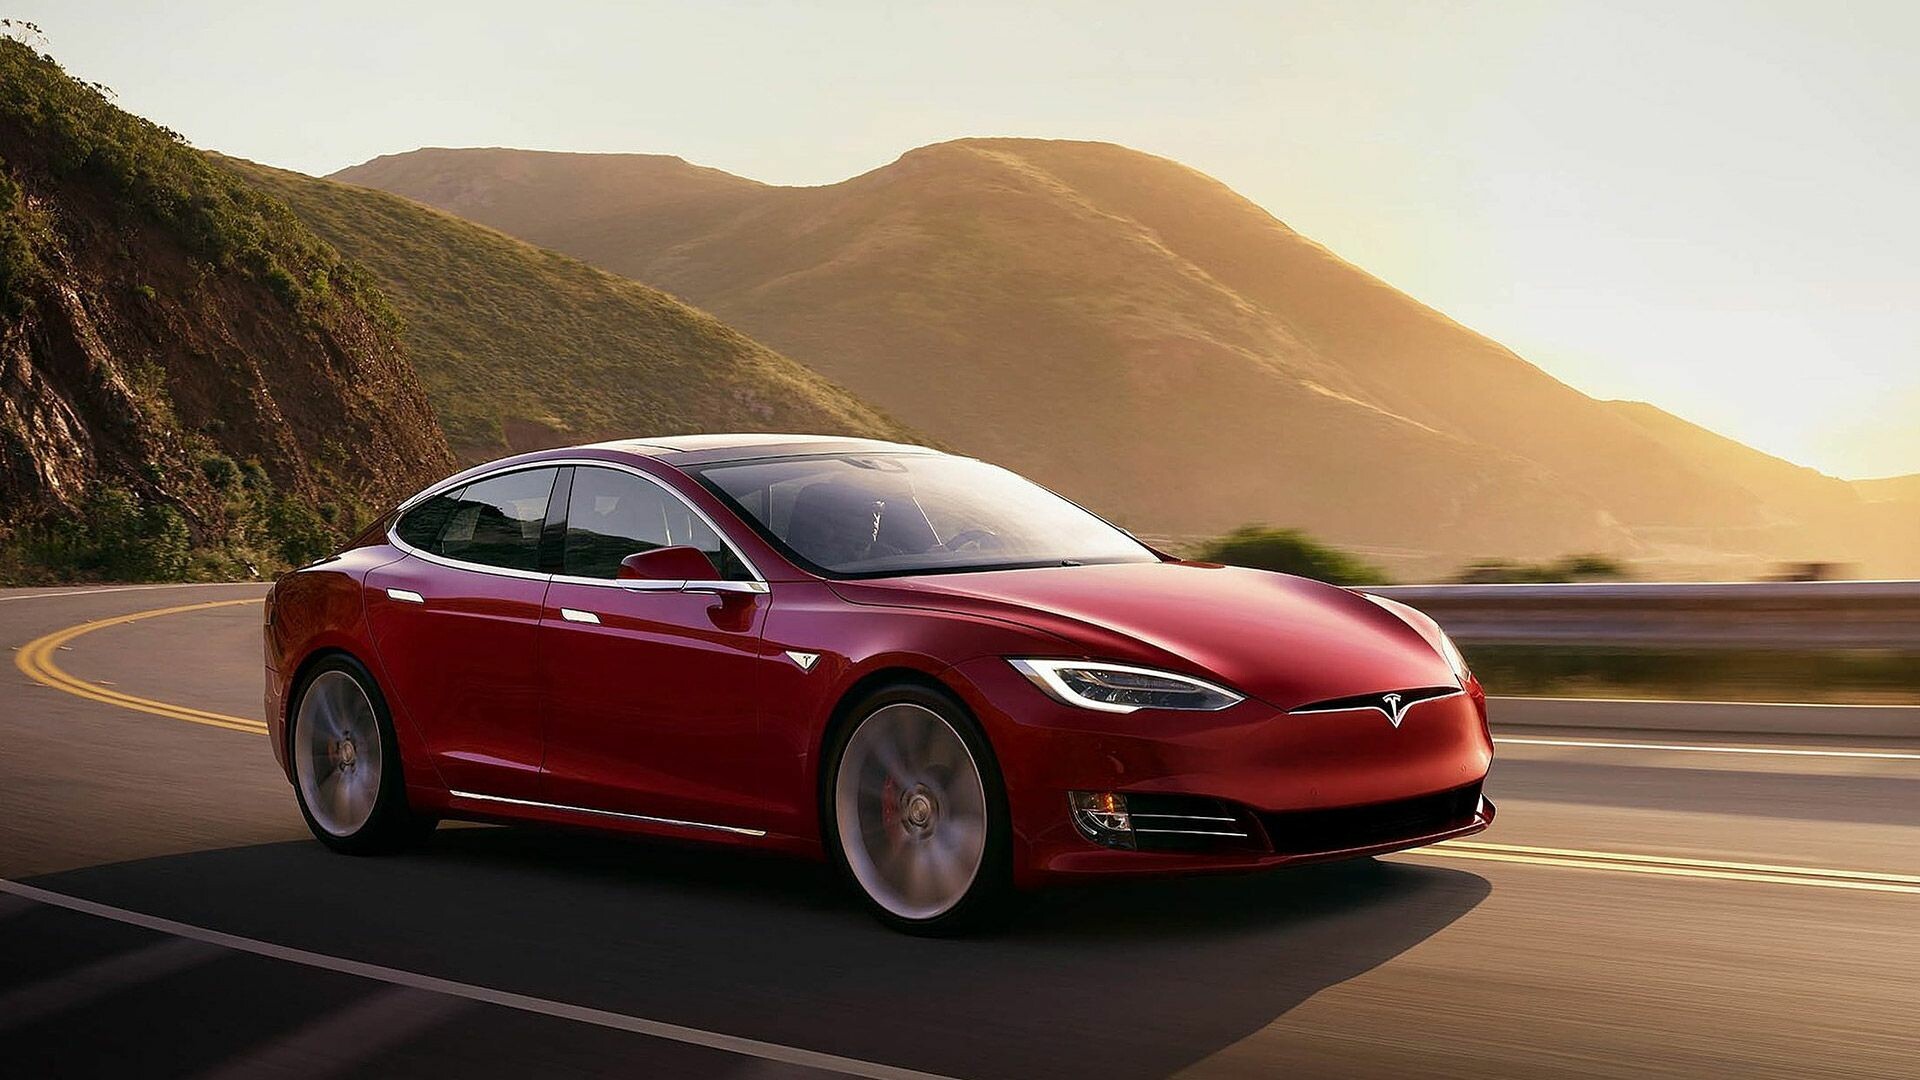 Tesla Model S: Electric vehicle, A dual-motor system with all-wheel drive. 1920x1080 Full HD Wallpaper.